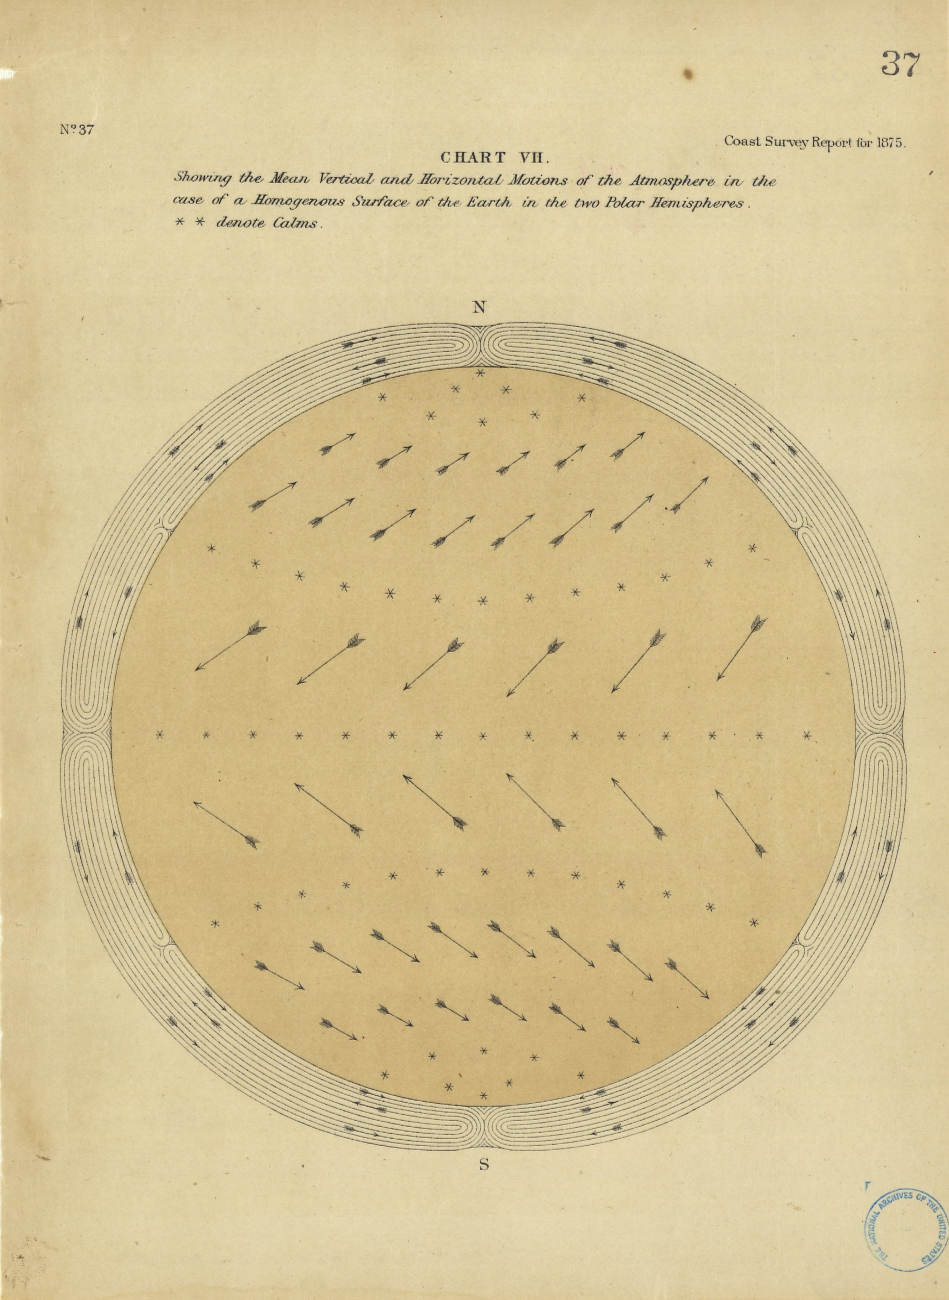 Map showing the mean vertical and horizontal motions of the atmosphere in thecase of a homogenous sruface of the Earth in the two Polar Hemispheres byWilliam Ferrel